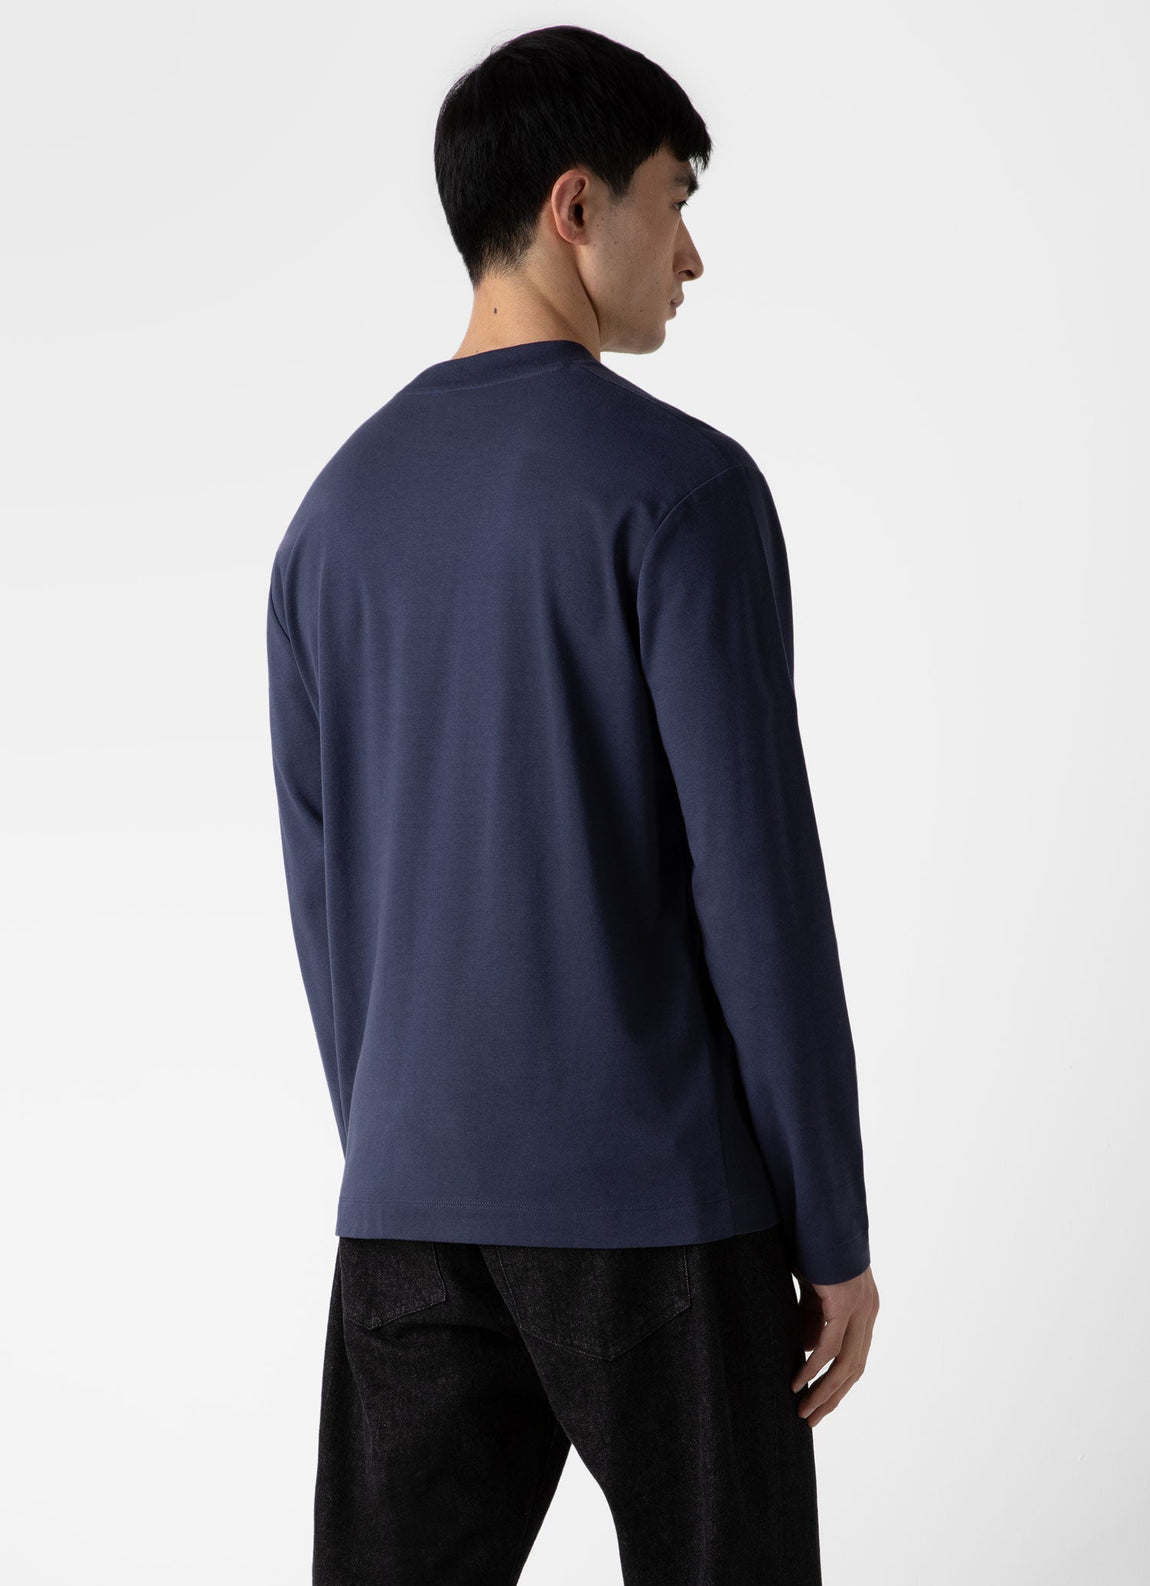 Men's Brushed Cotton Long Sleeve T-shirt in Navy